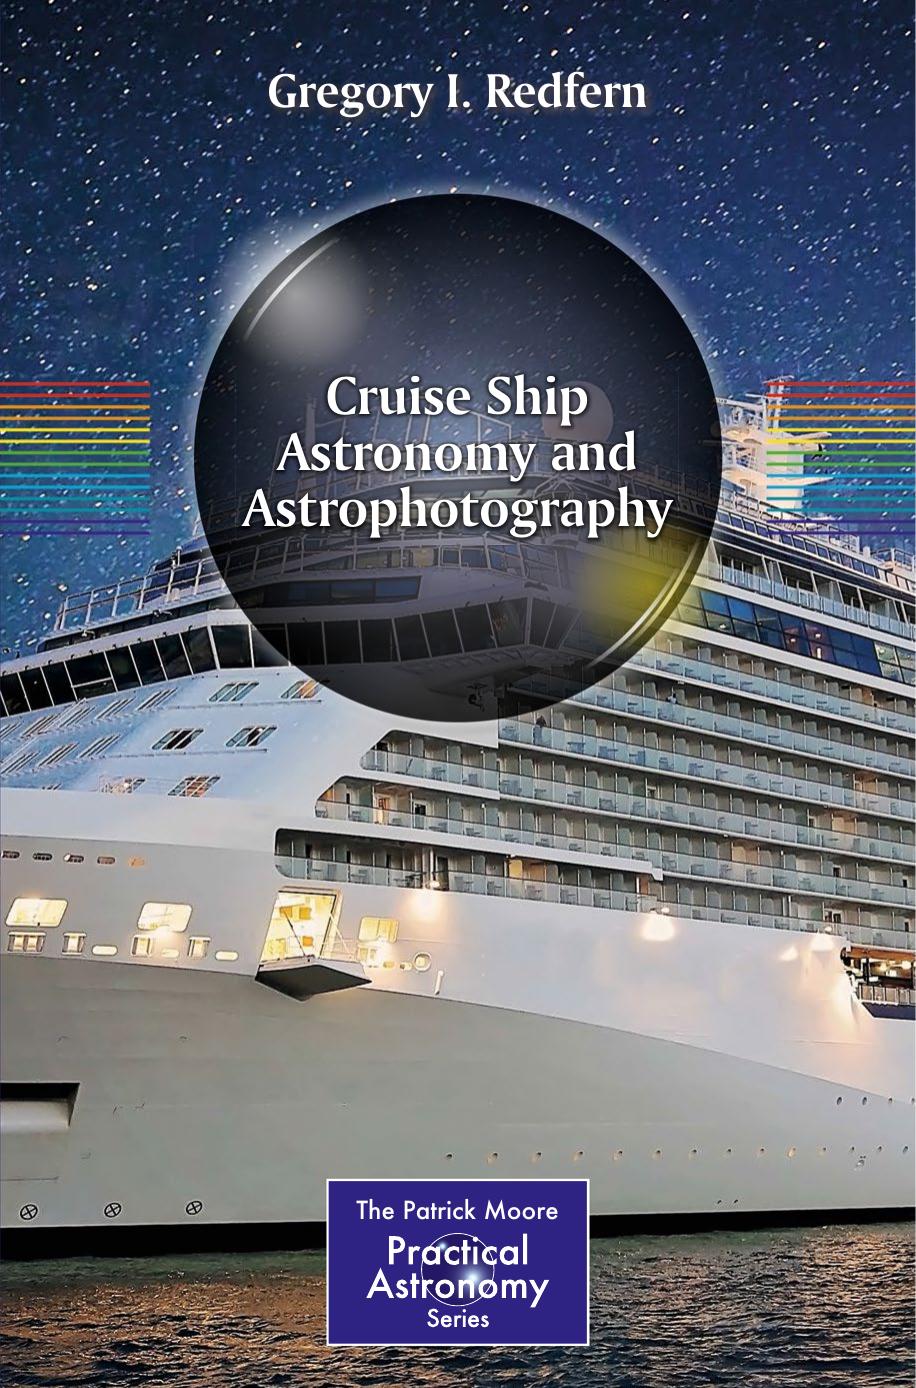 Cruise Ship Astronomy and Astrophotography by Gregory I. Redfern